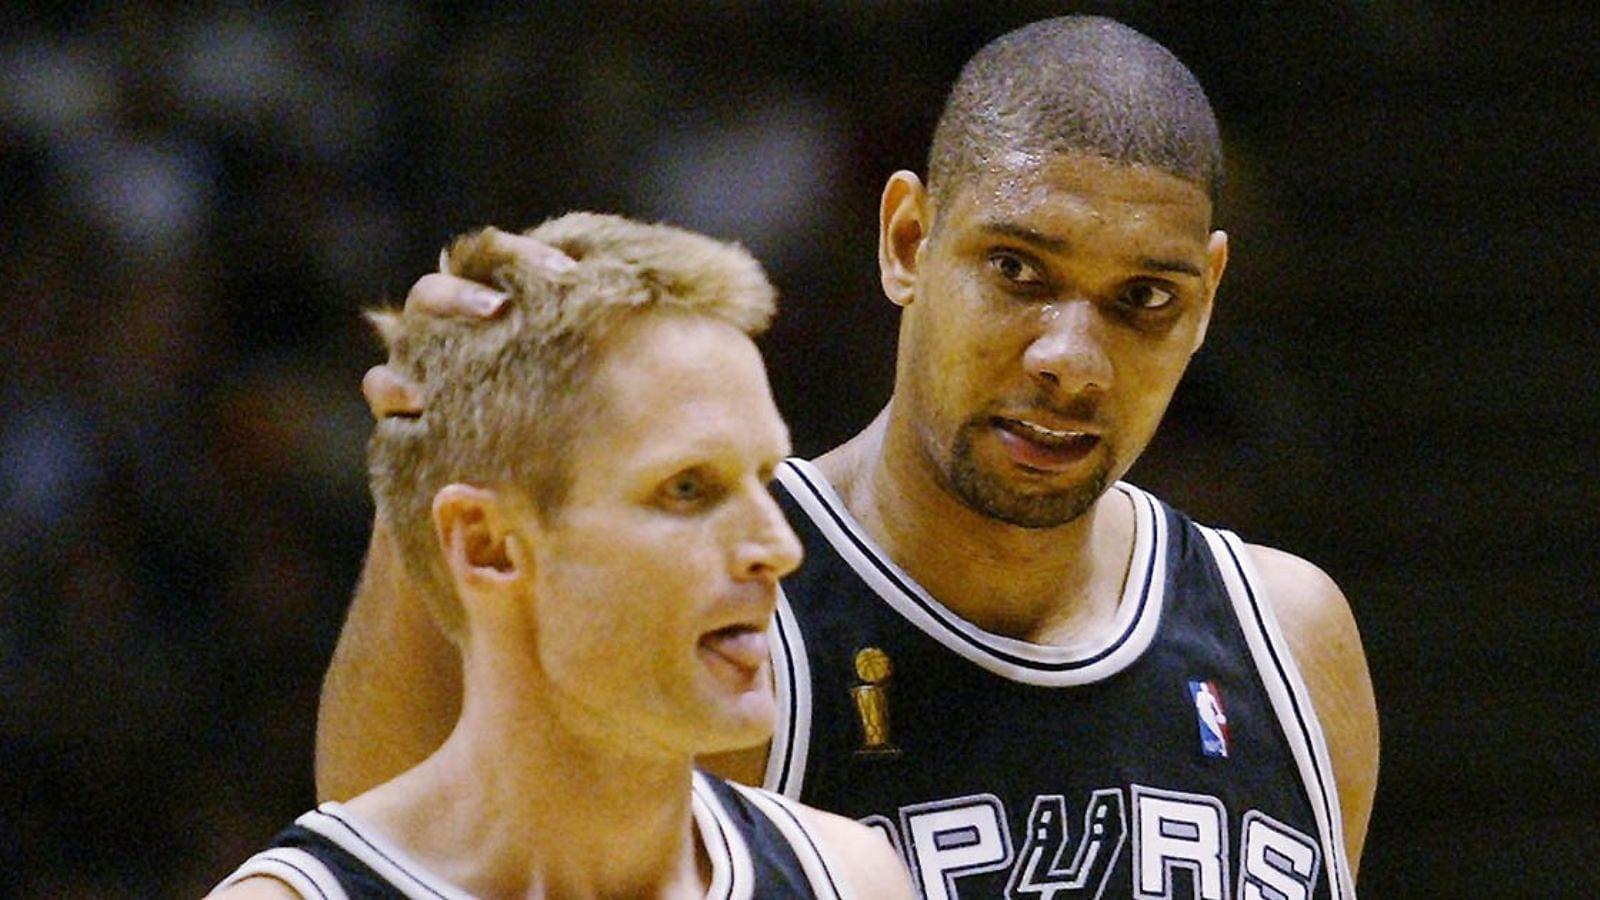 A 37-year-old Steve Kerr with 4 three-pointers spearheaded a come back by Tim Duncan and Co. against the Mavericks in a close out 2003 WCF game